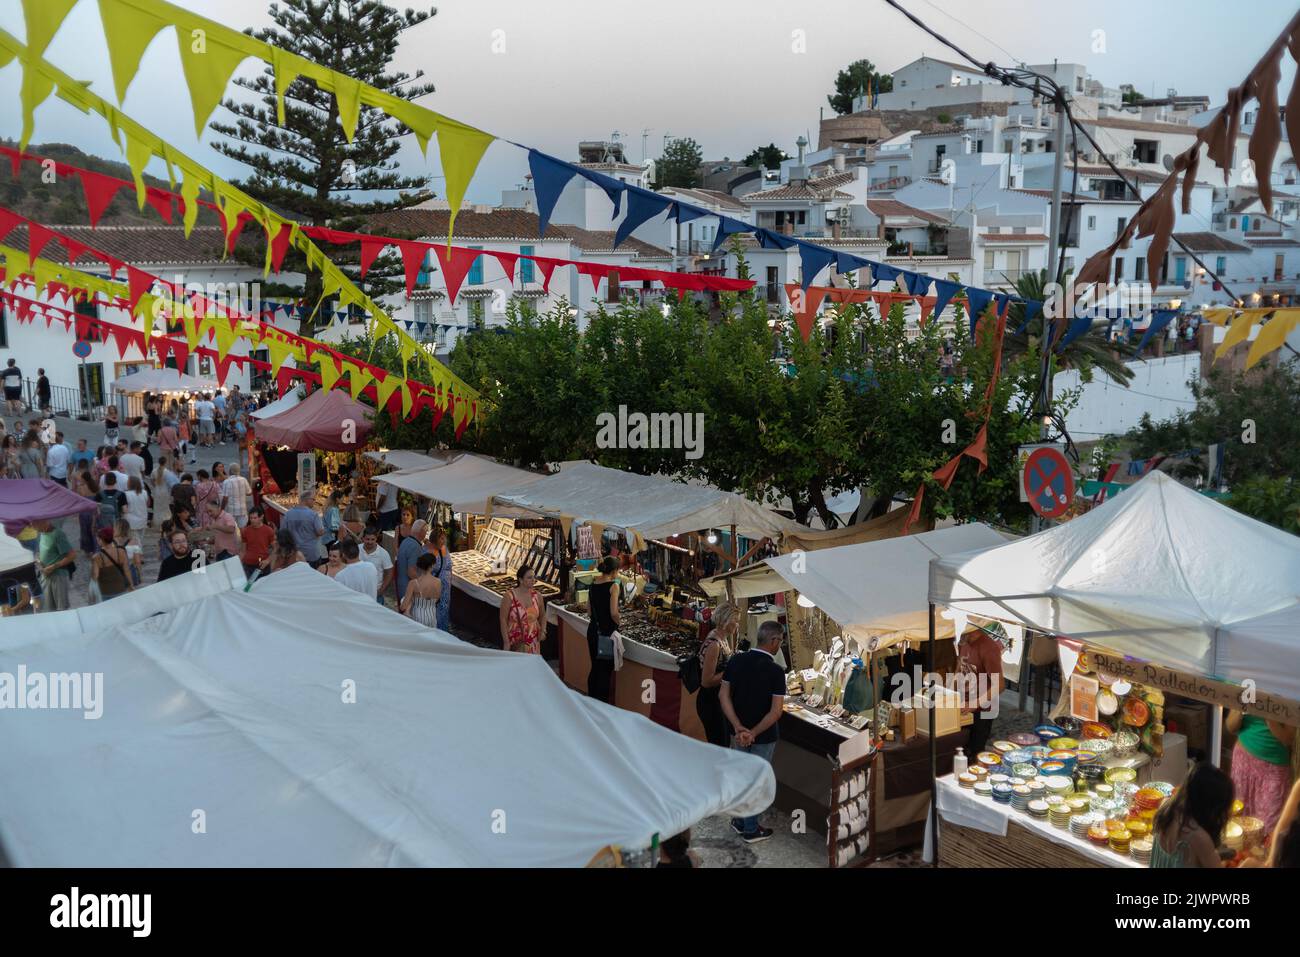 Frigiliana, Malaga, Spain, August 27, 2022: town celebrating the festival of the three cultures with garlands and people shopping at the medieval mark Stock Photo